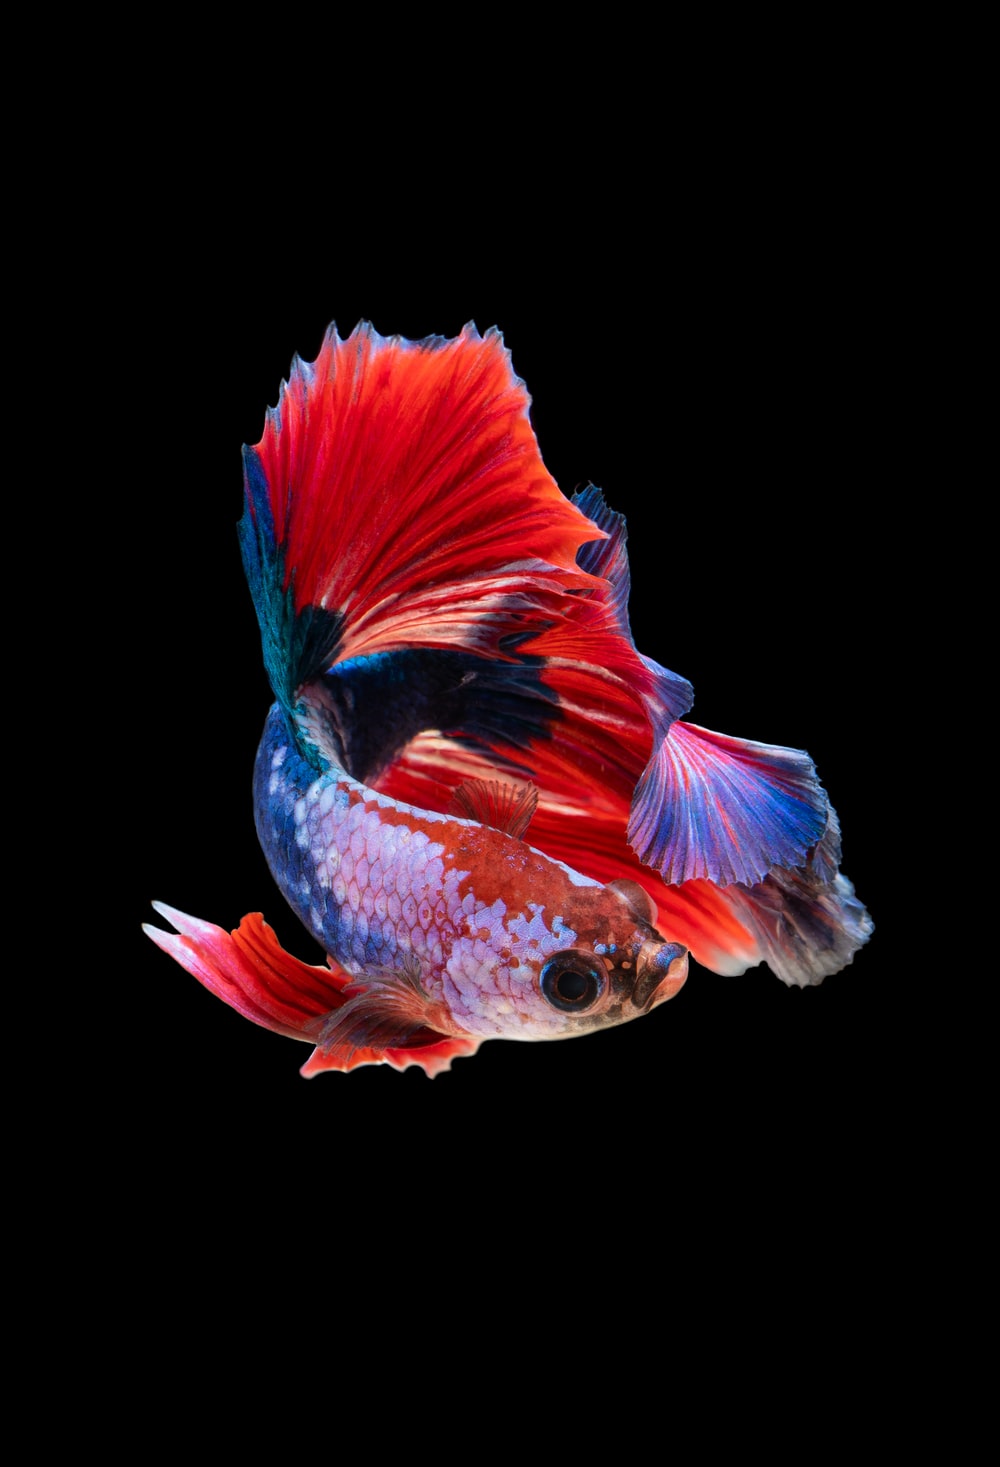 Fish Wallpaper Picture. Download Free Image